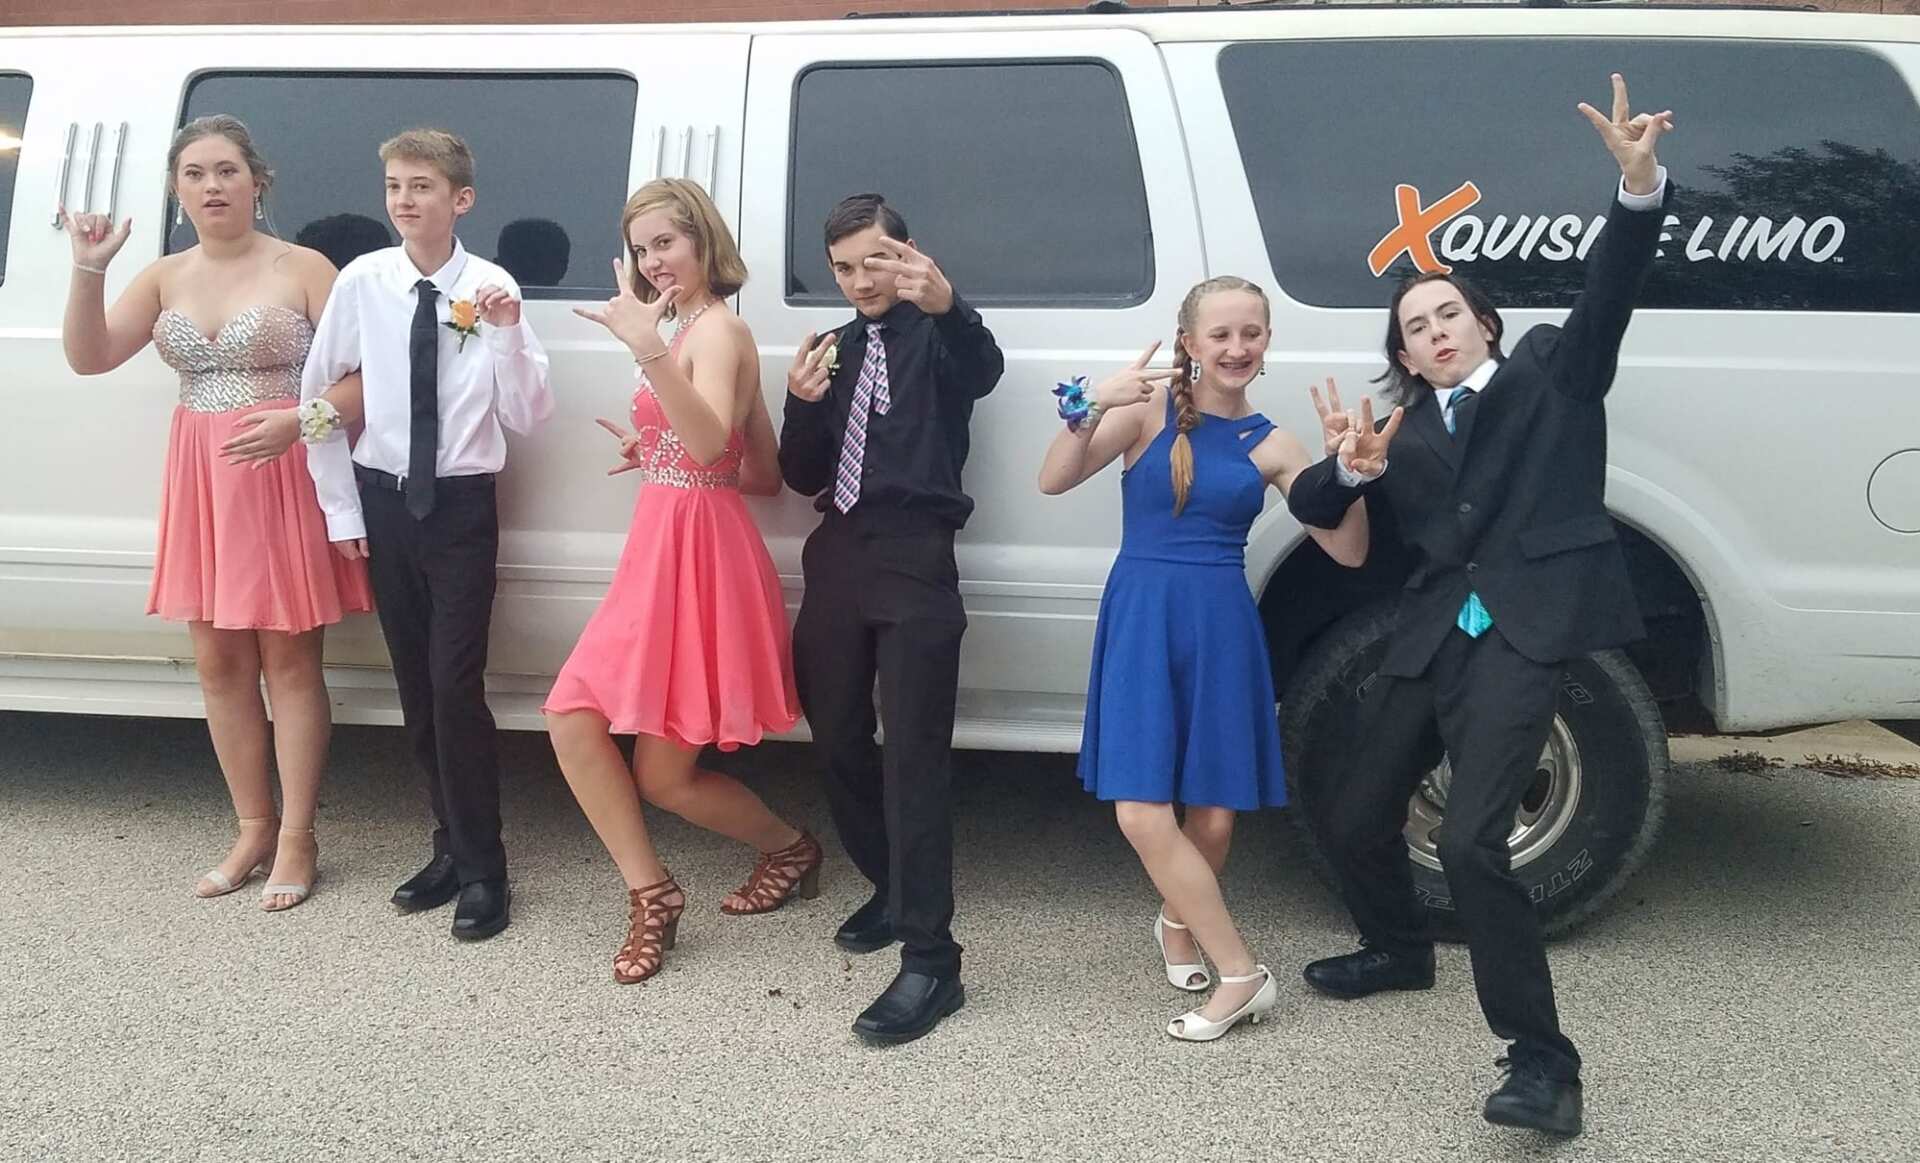 A group of people posing in front of an Iowa City limo. for Prom